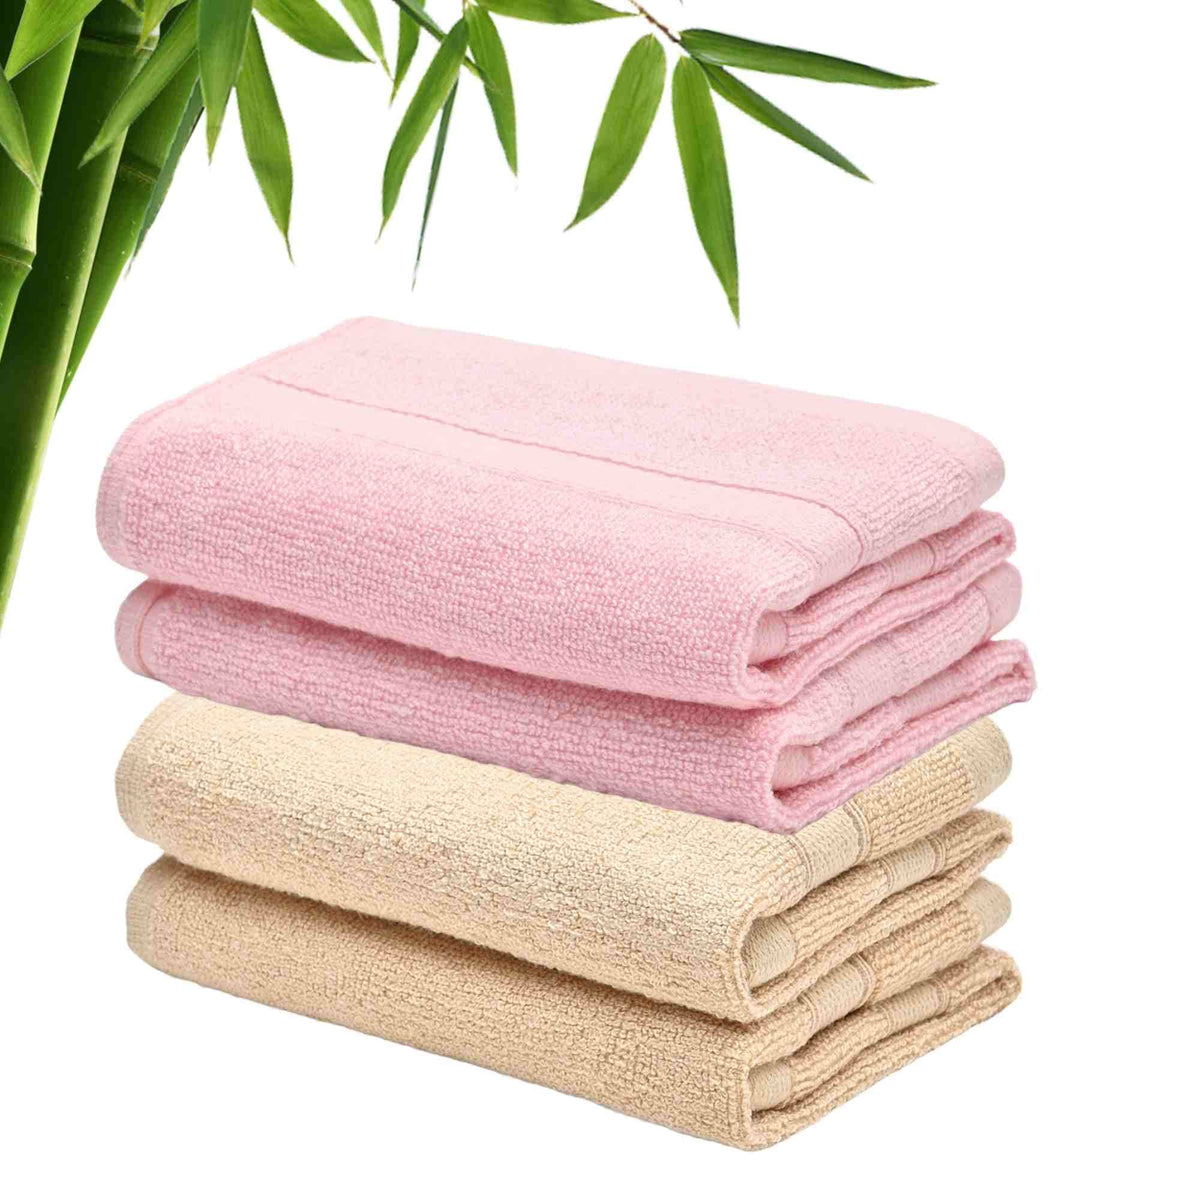 600GSM 100% Bamboo Face Towel Set | Anti Odour & Anti Bacterial Bamboo Towel |30cm X 30cm | Ultra Absorbent & Quick Drying Face Towel for Women & Men (Pack of 4, Pink + Beige)